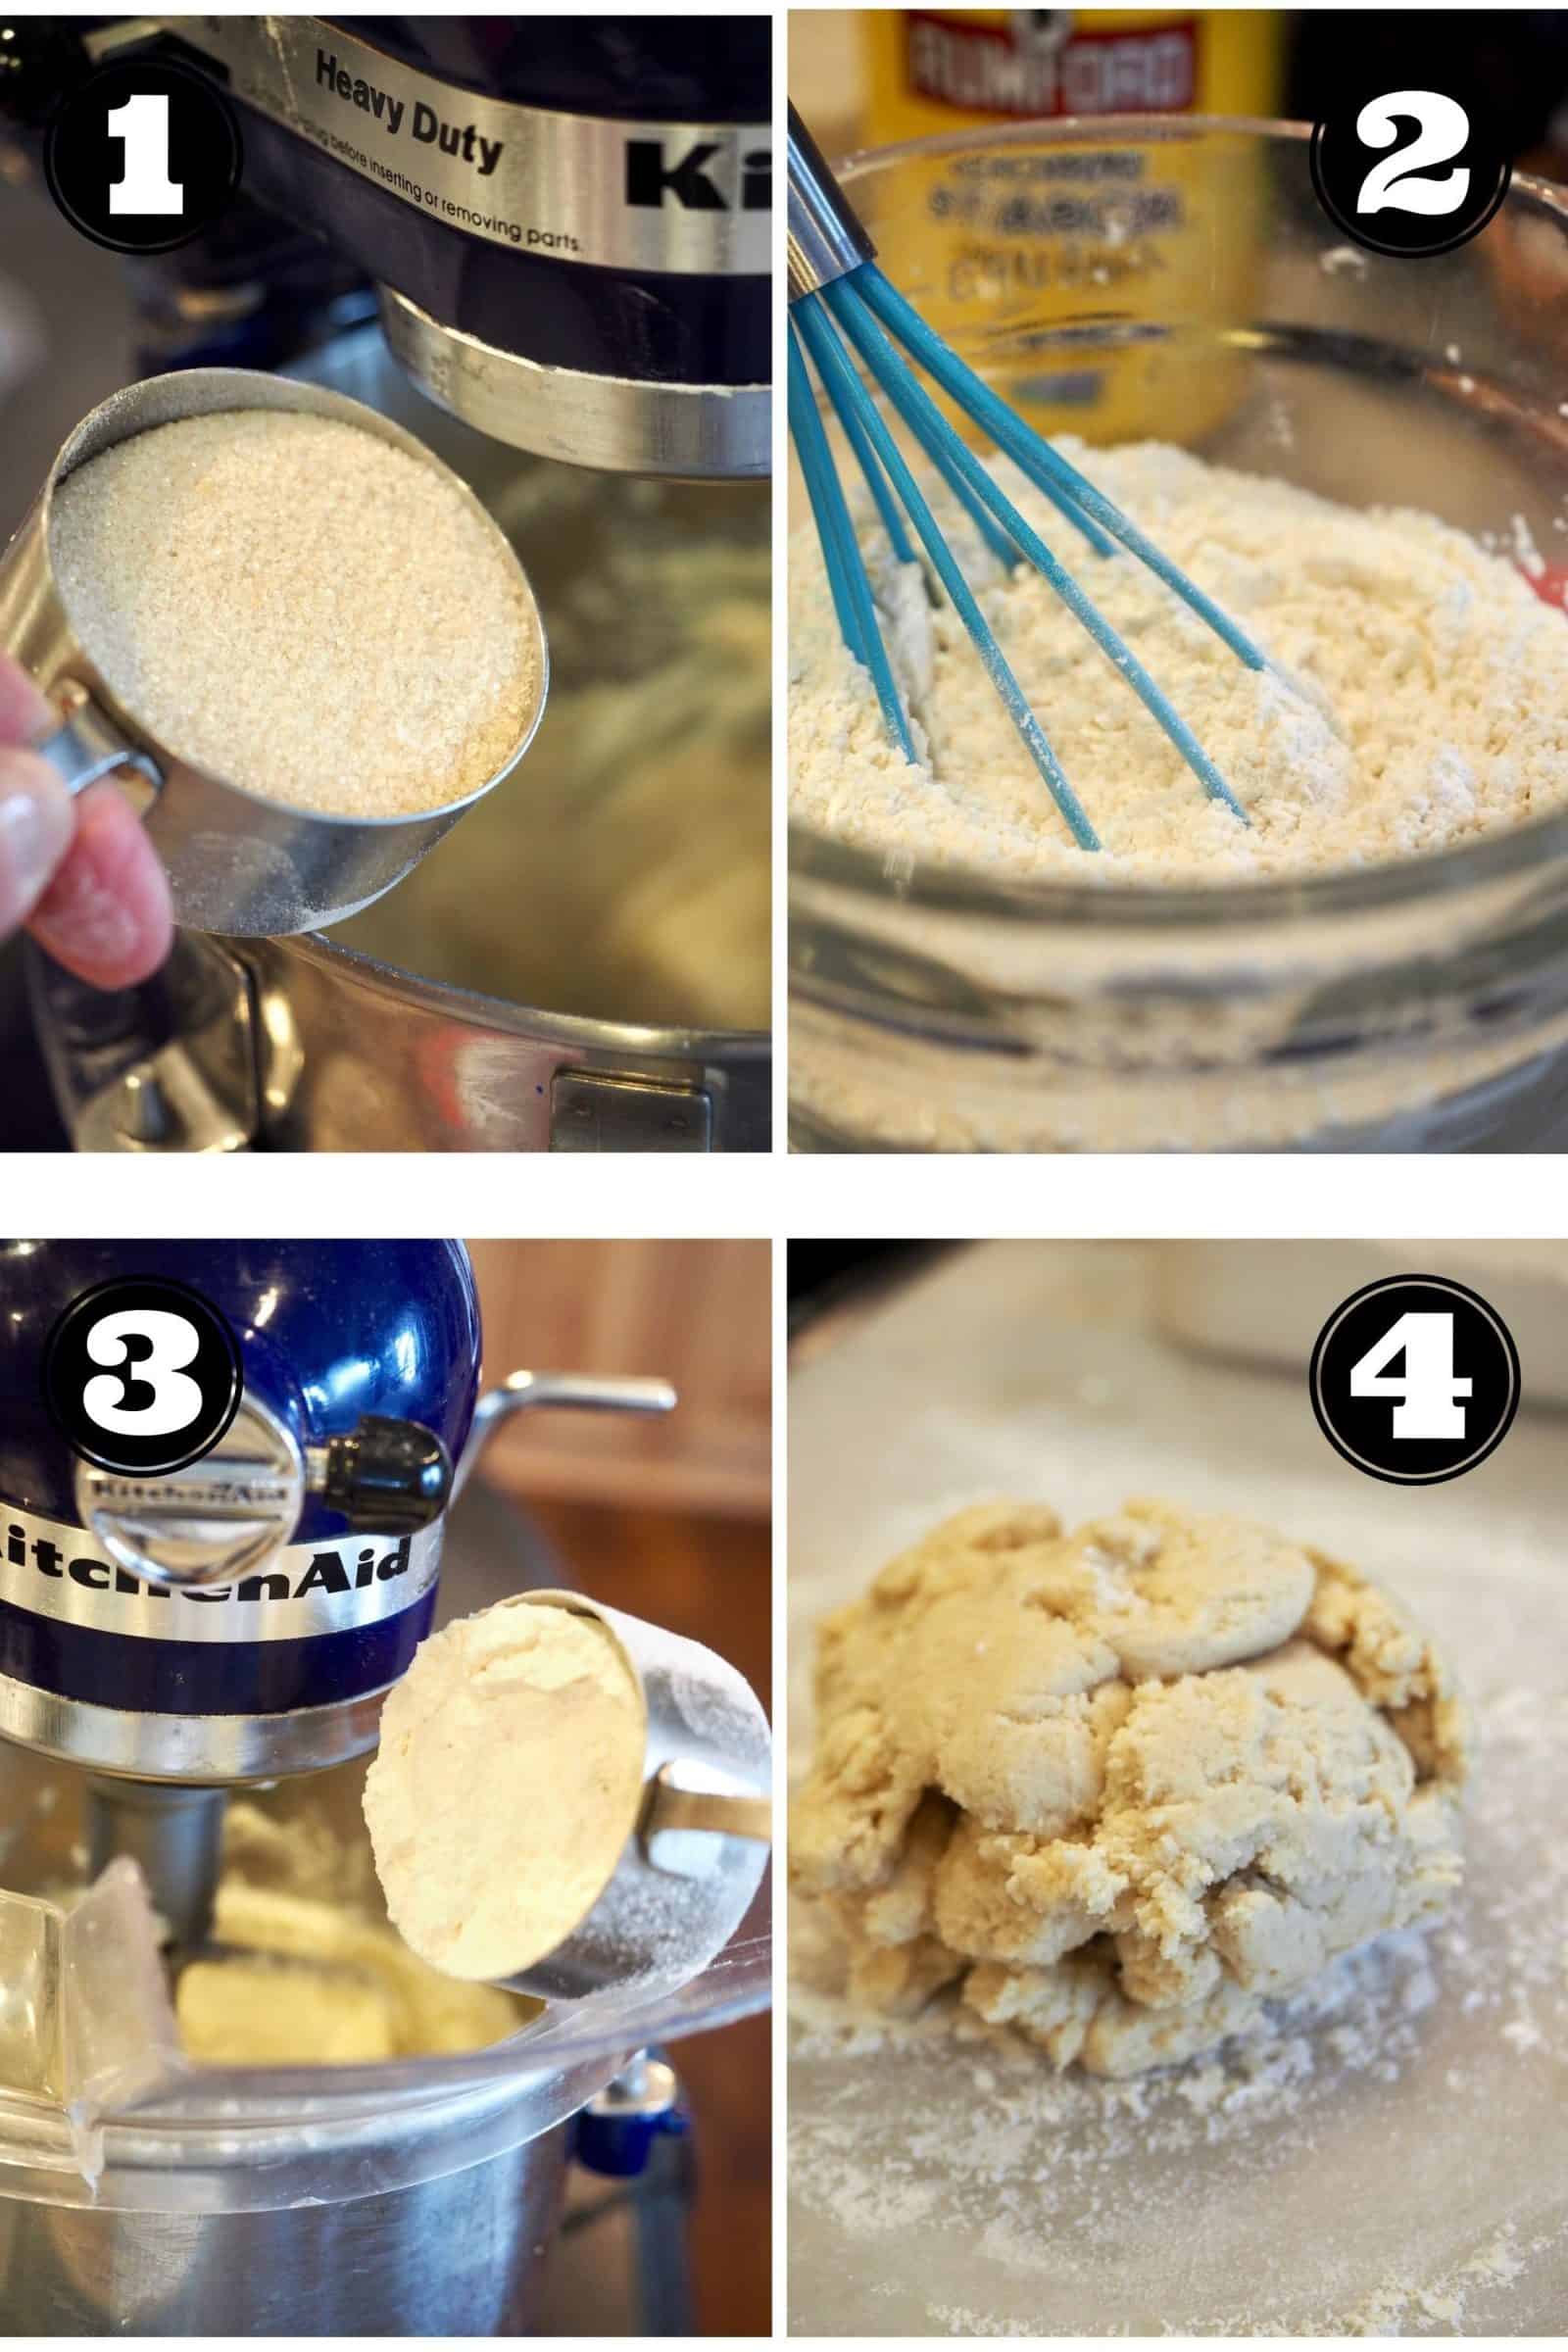 Process shots for Classic shortbread cookies. 1. adding sugar to butter. 2. whisking together salt, flour and cornstarch. 3. adding flour mixture to sugar/butter mix. 4. crumbly dough before kneading.